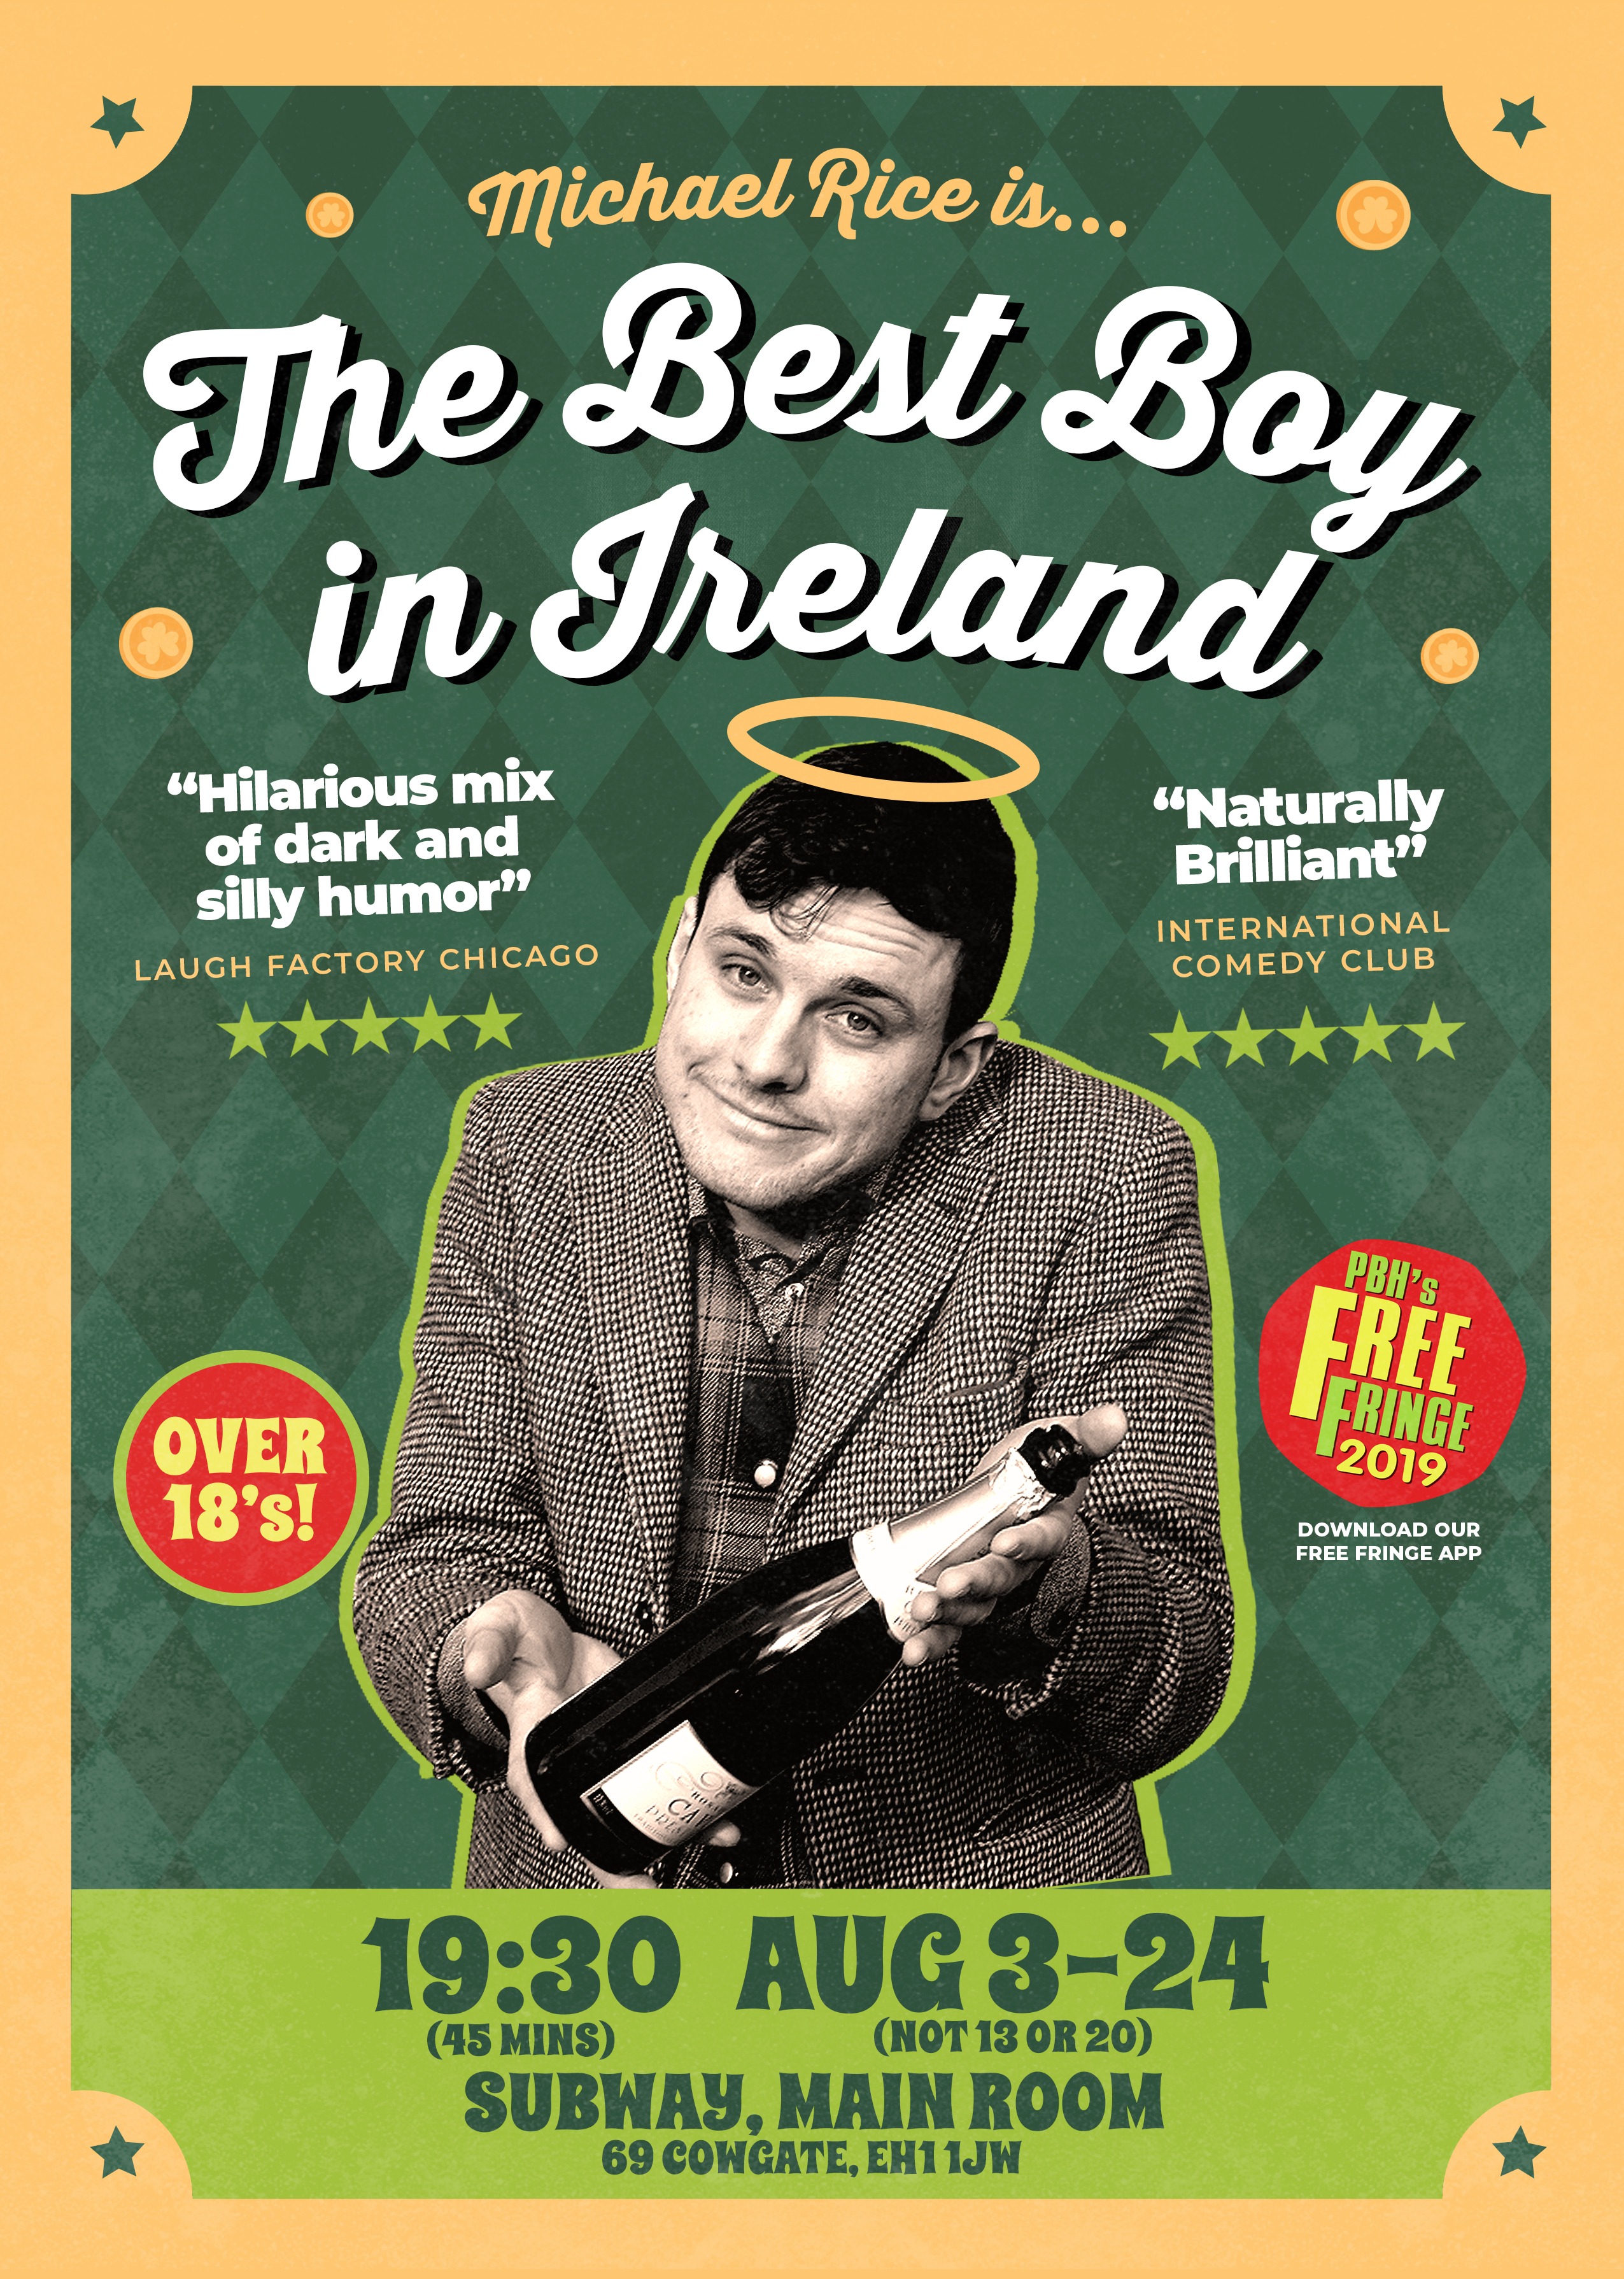 The poster for Best Boy In Ireland